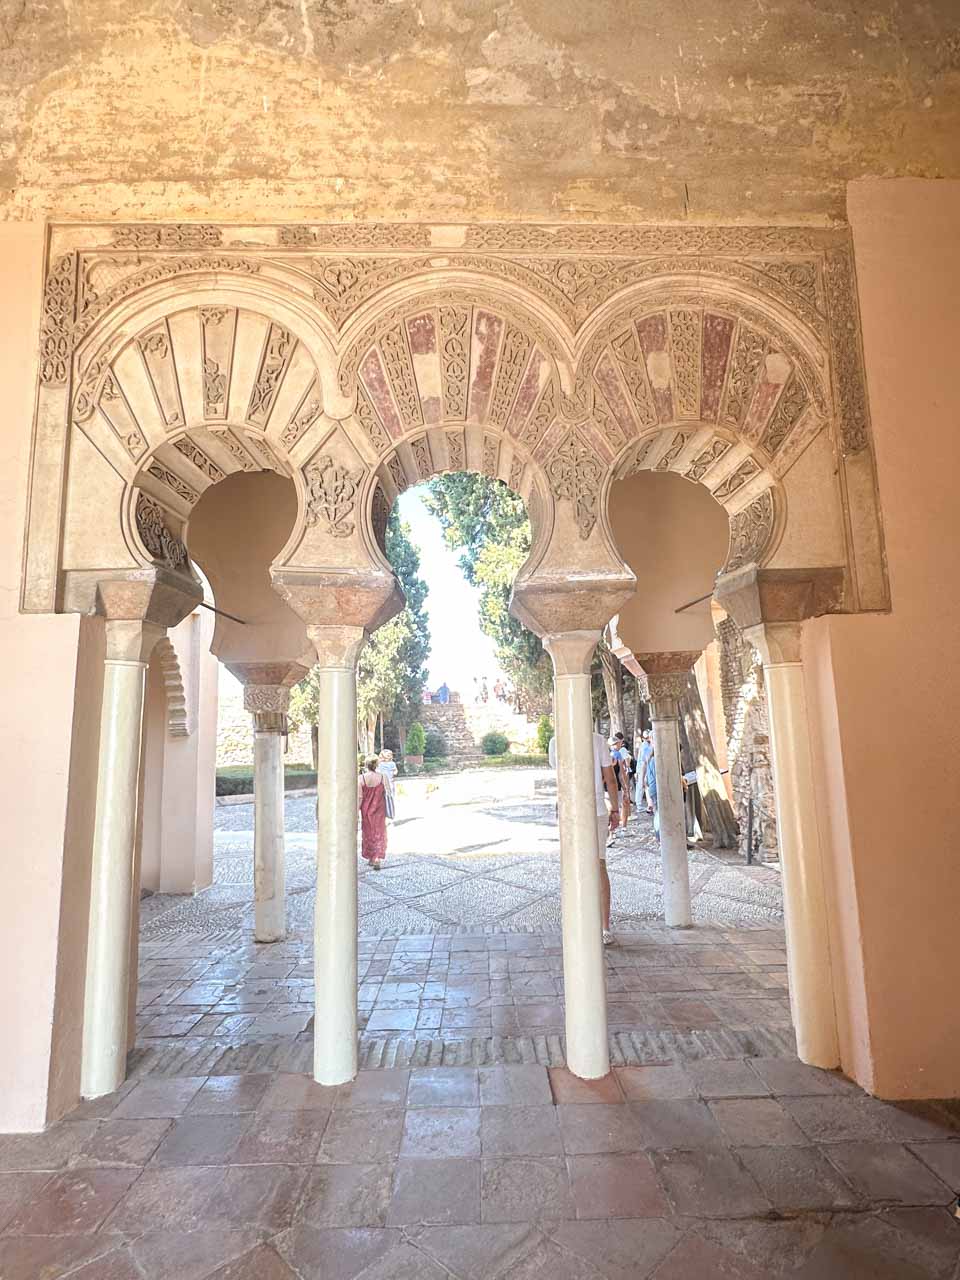 An arched gateway with elaborate Moorish designs and columns at the Alcazaba of Malaga